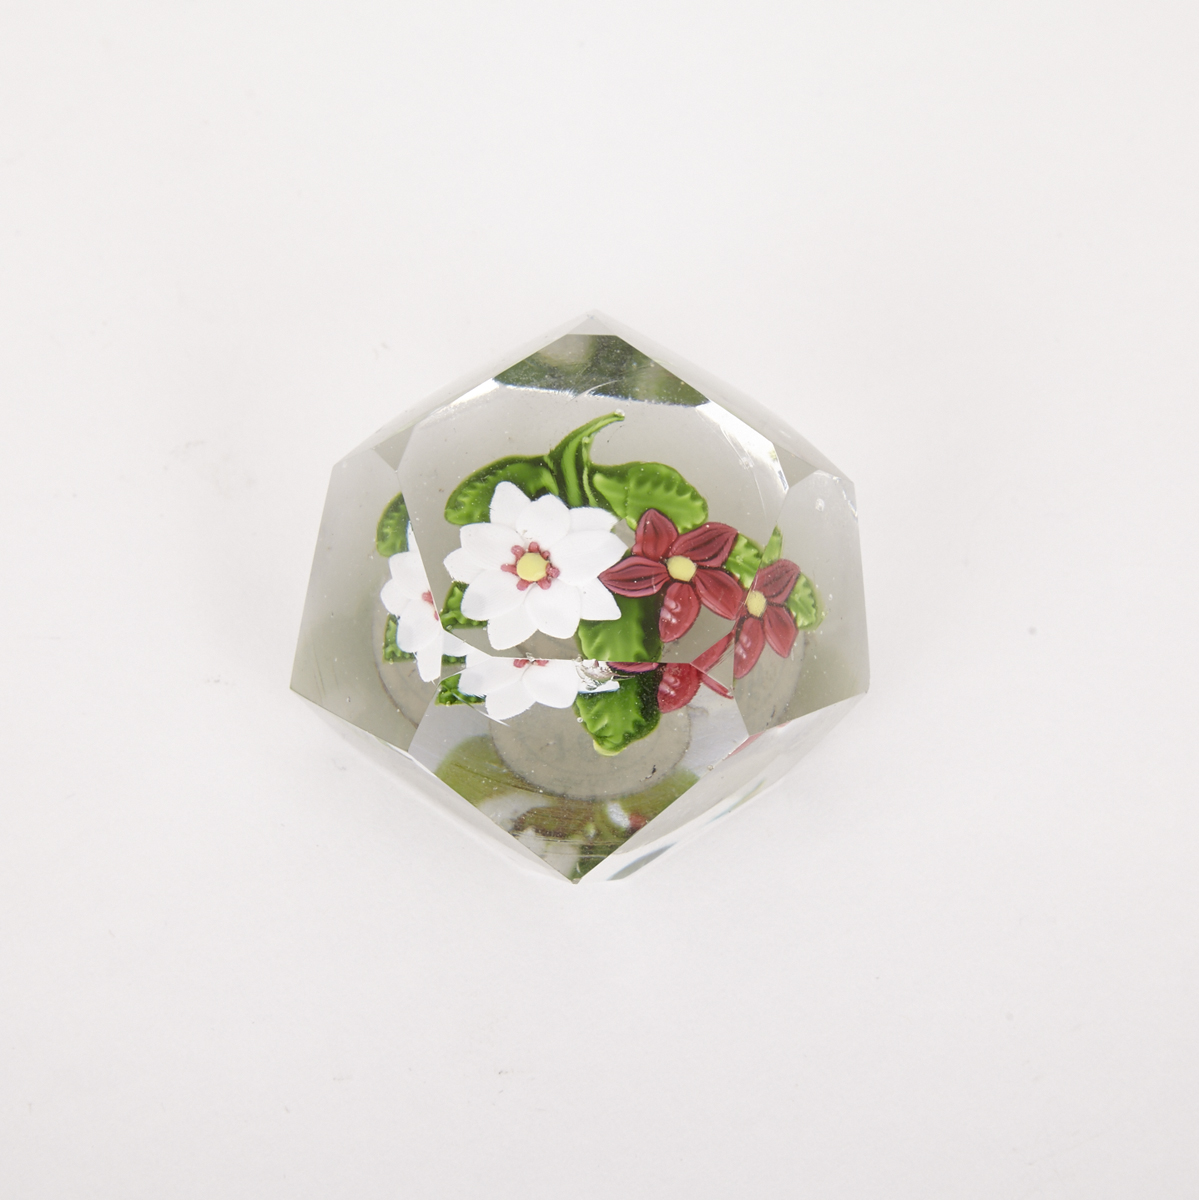 French Faceted Floral Glass Paperweight, 19th century